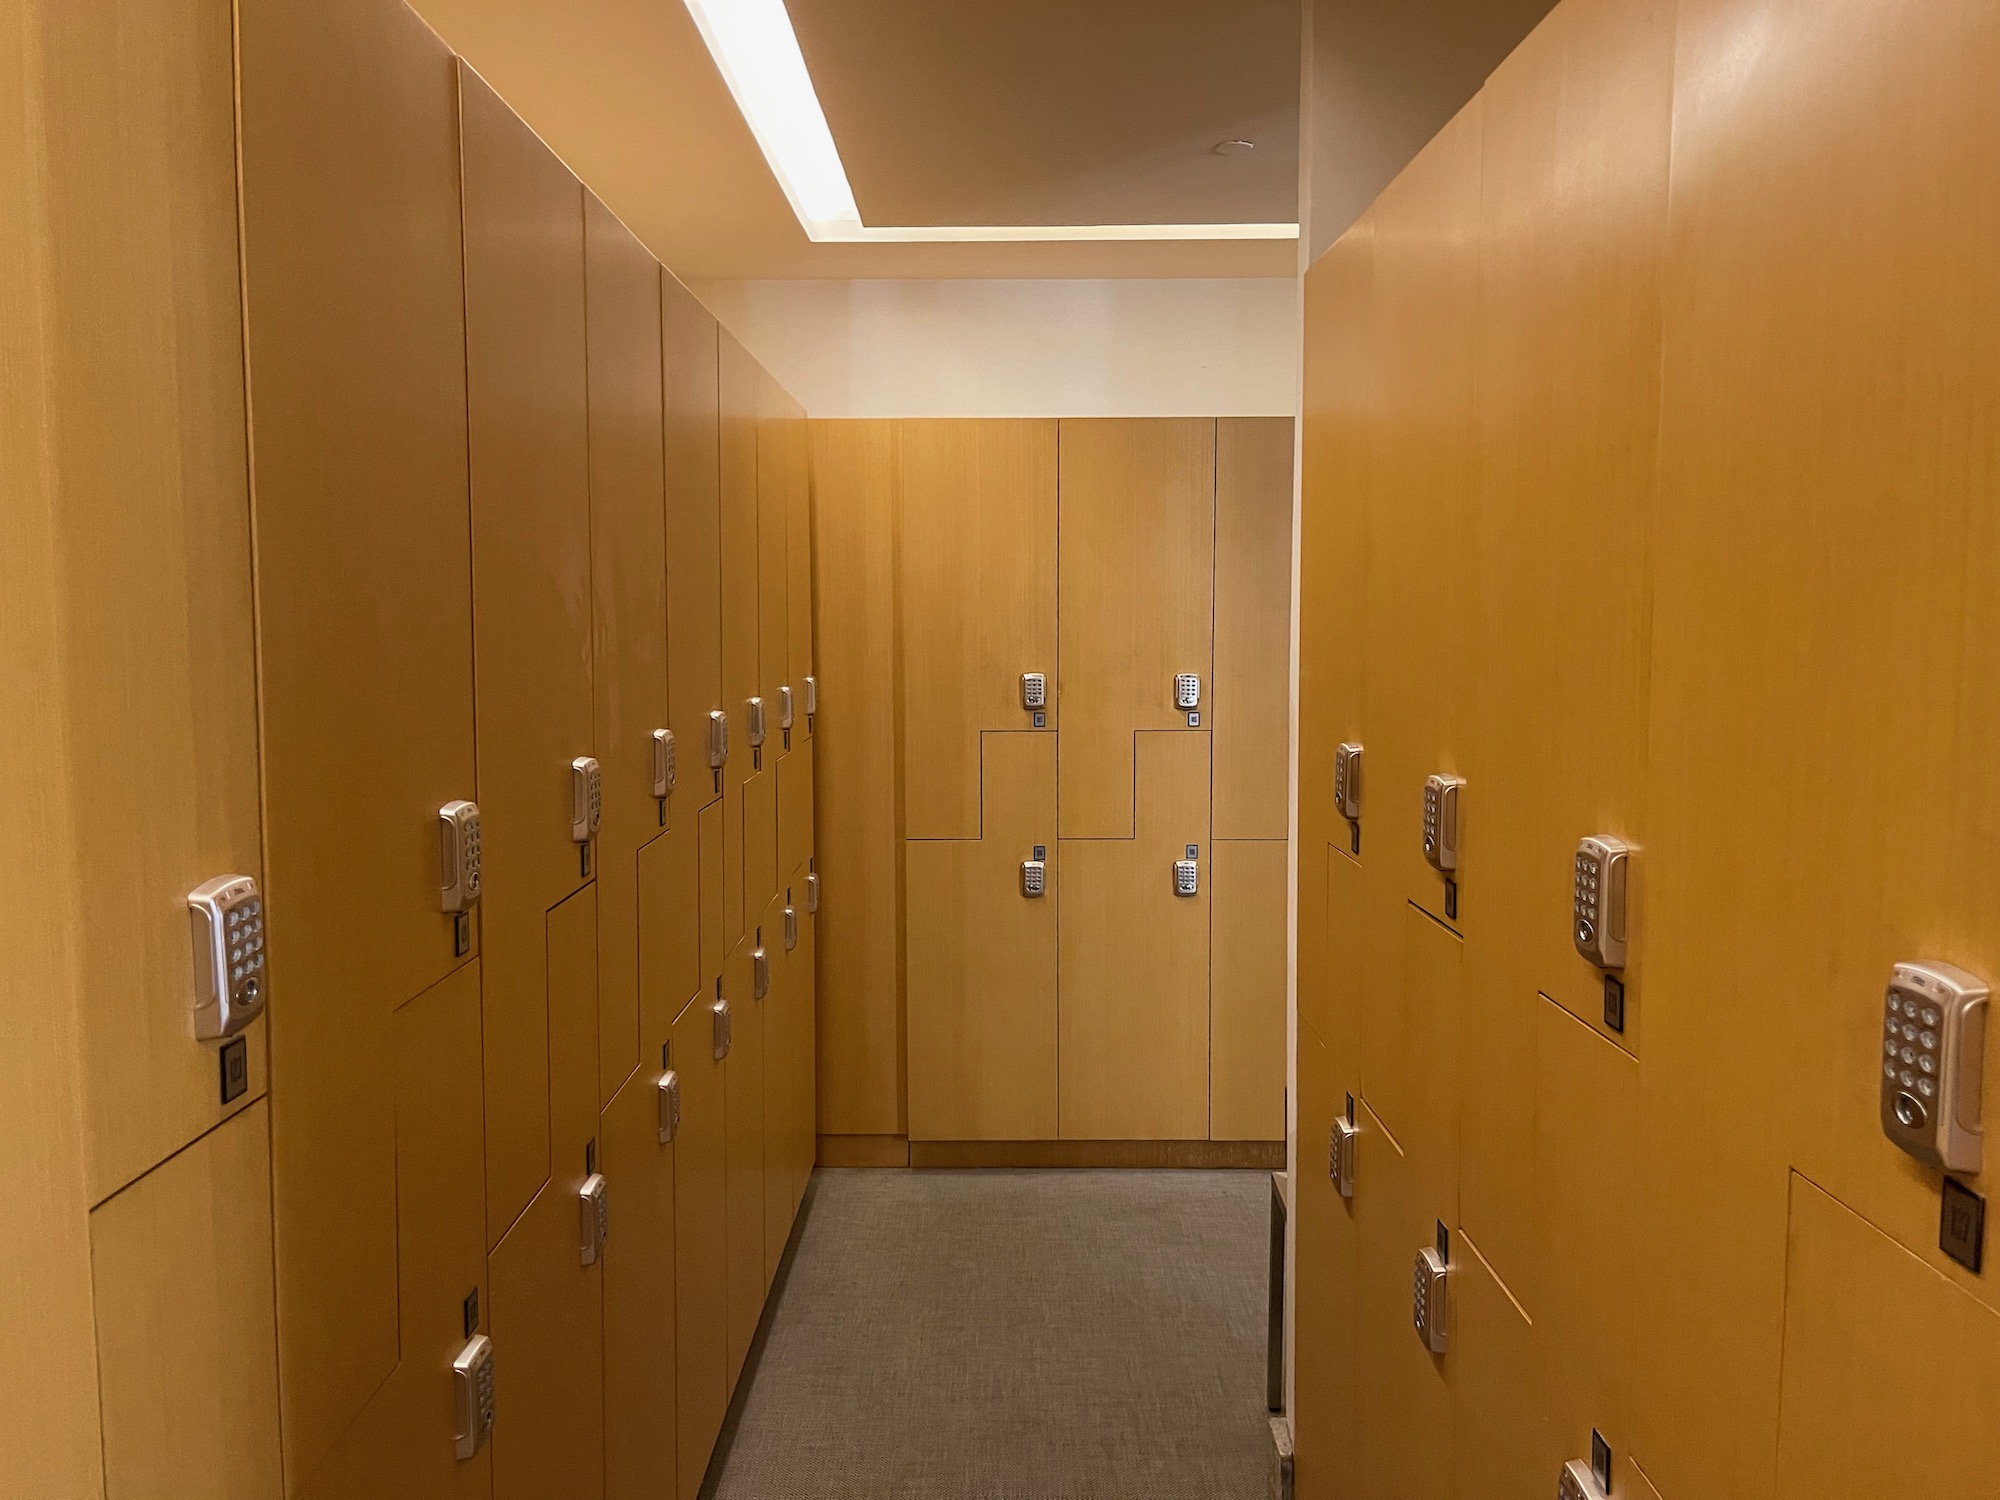 a hallway with lockers and a light fixture